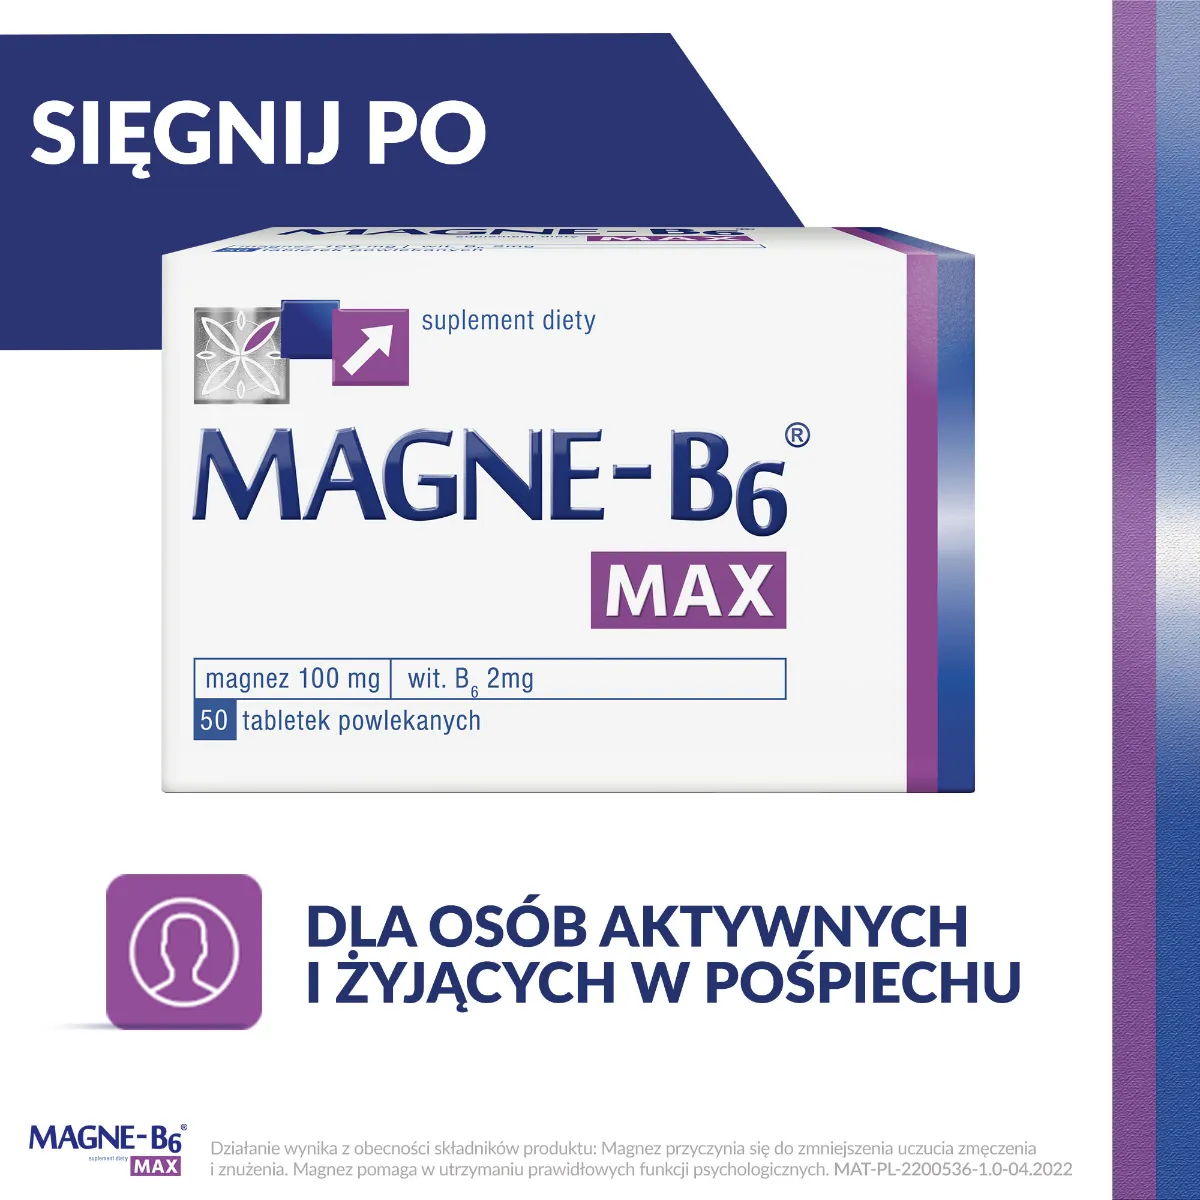 Magne-B6 MAX, suplement diety, 50 tabletek powlekanych 